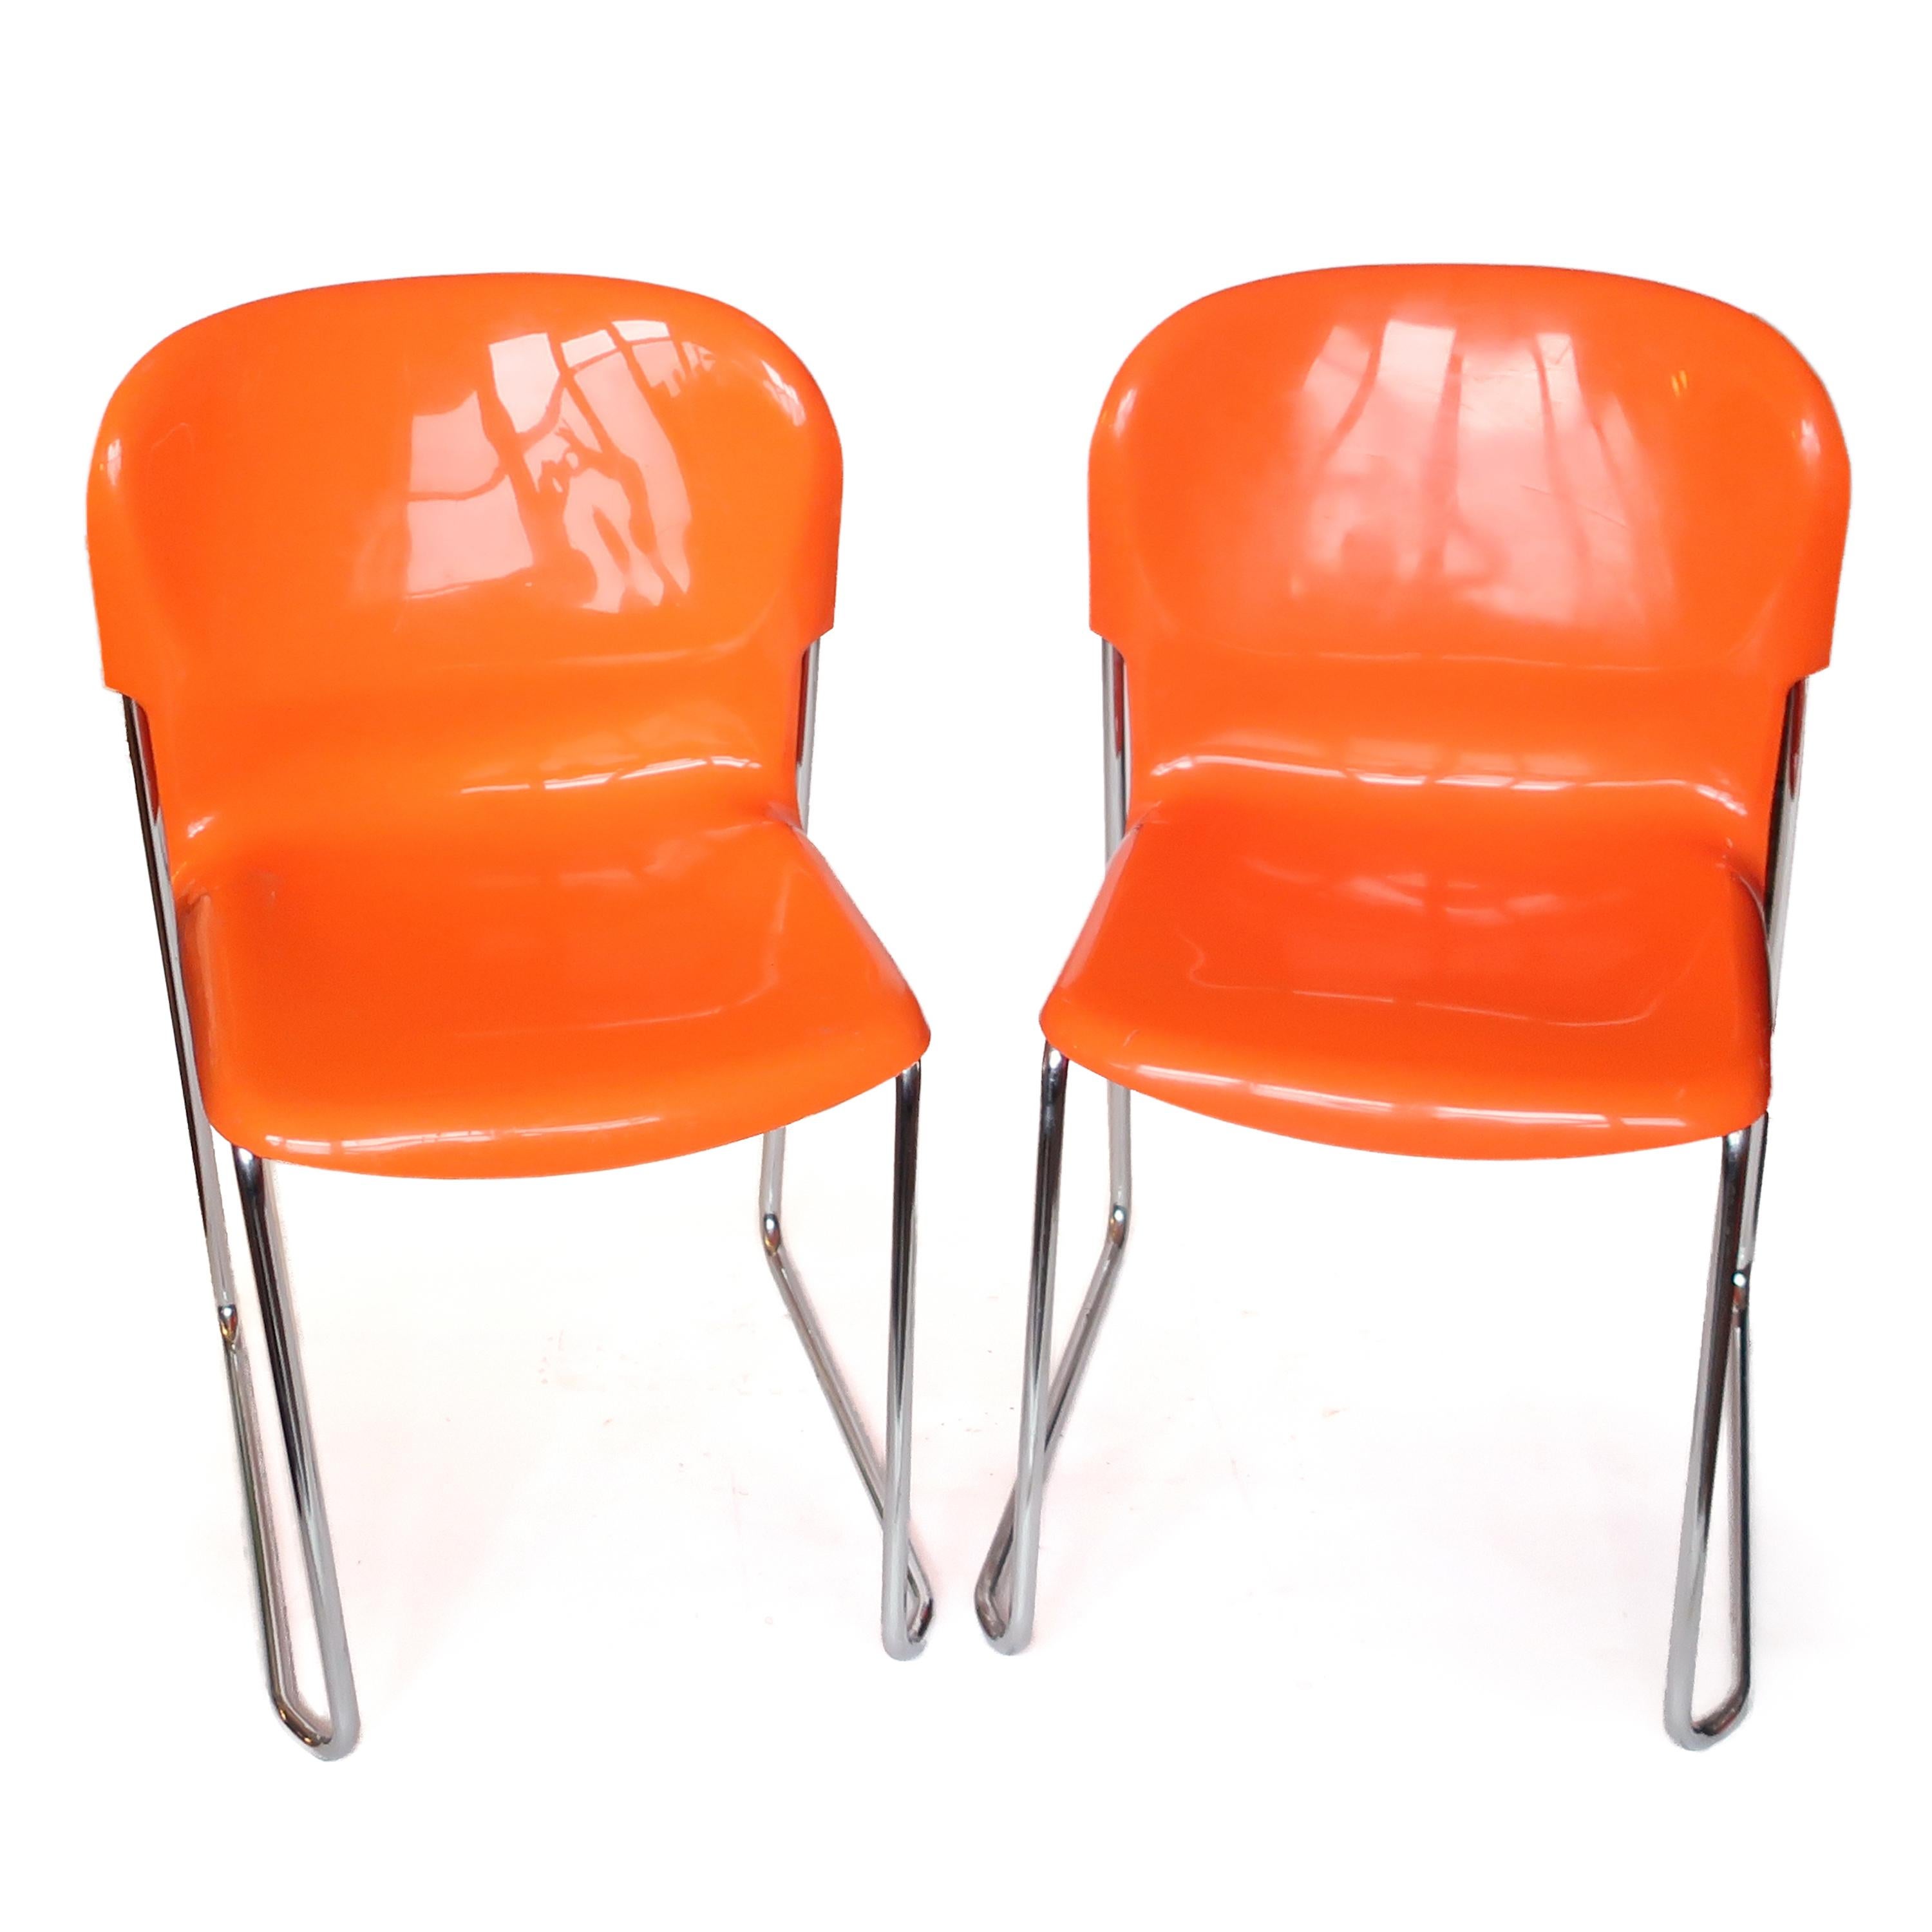 Mid-Century Modern Pair of Orange SM 400 Swing Chairs by Gerd Lange for Drabert For Sale